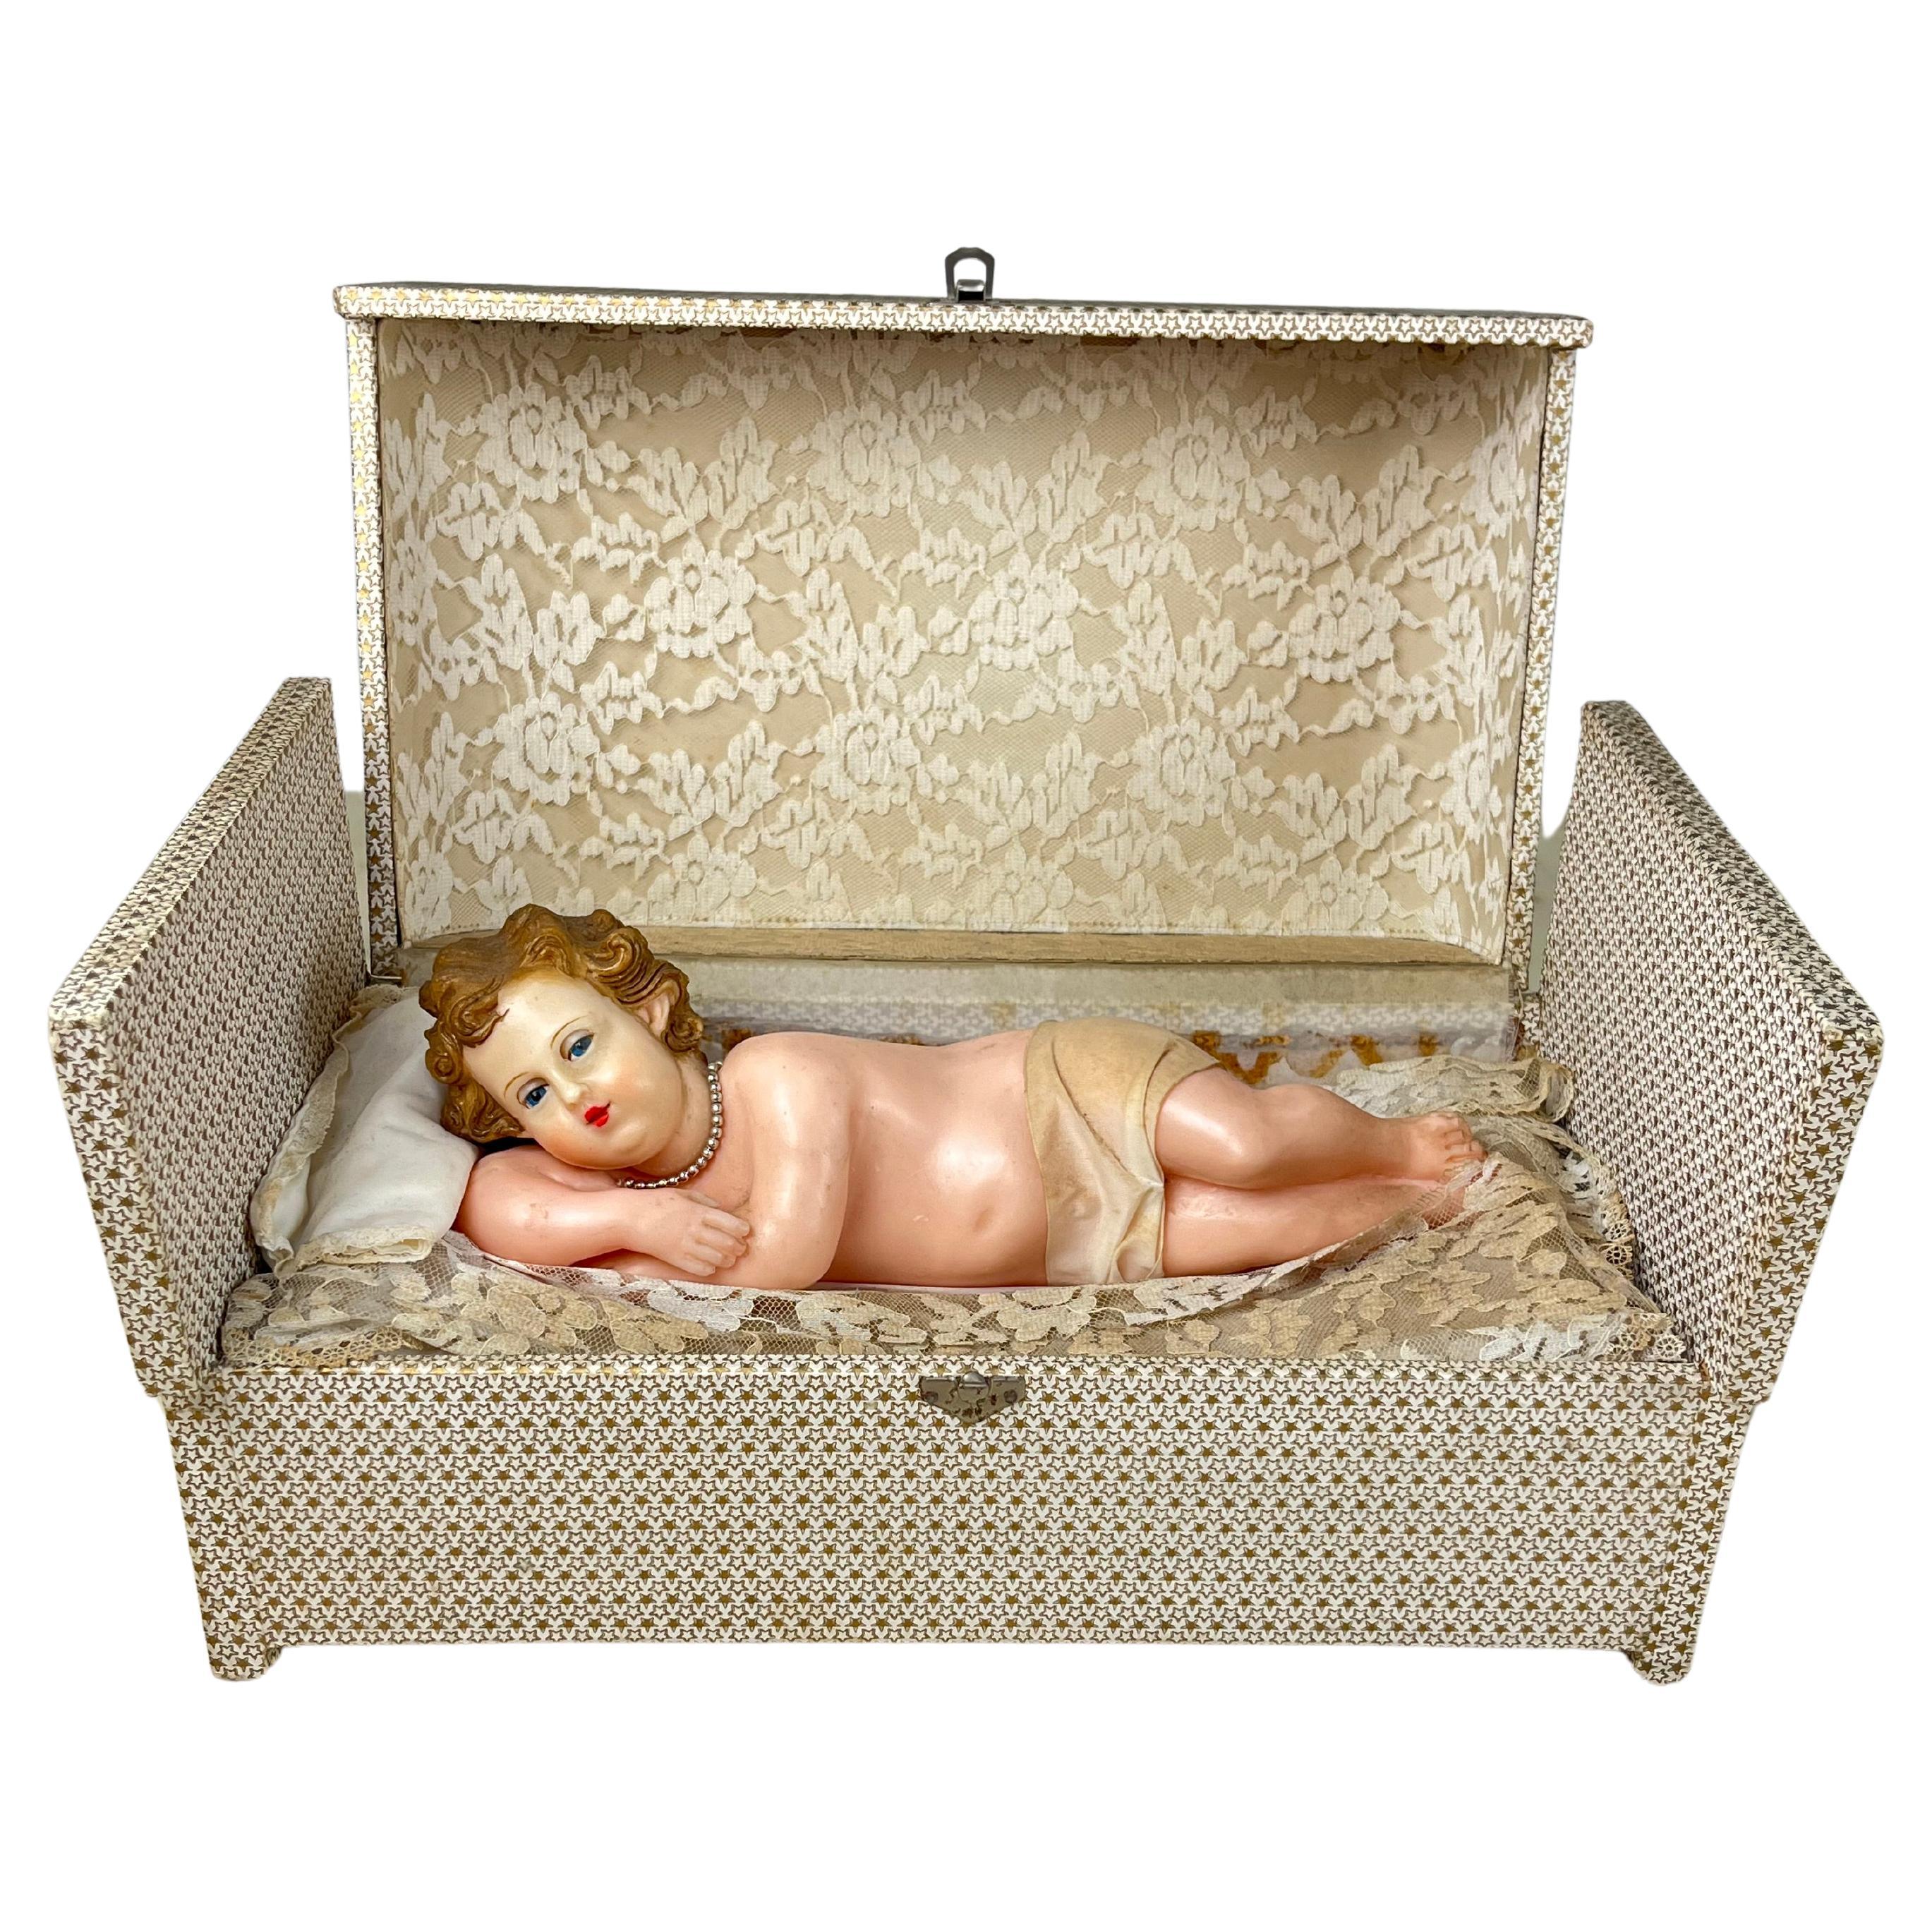 Baby Jesus Music Box and Movement 1960s For Sale